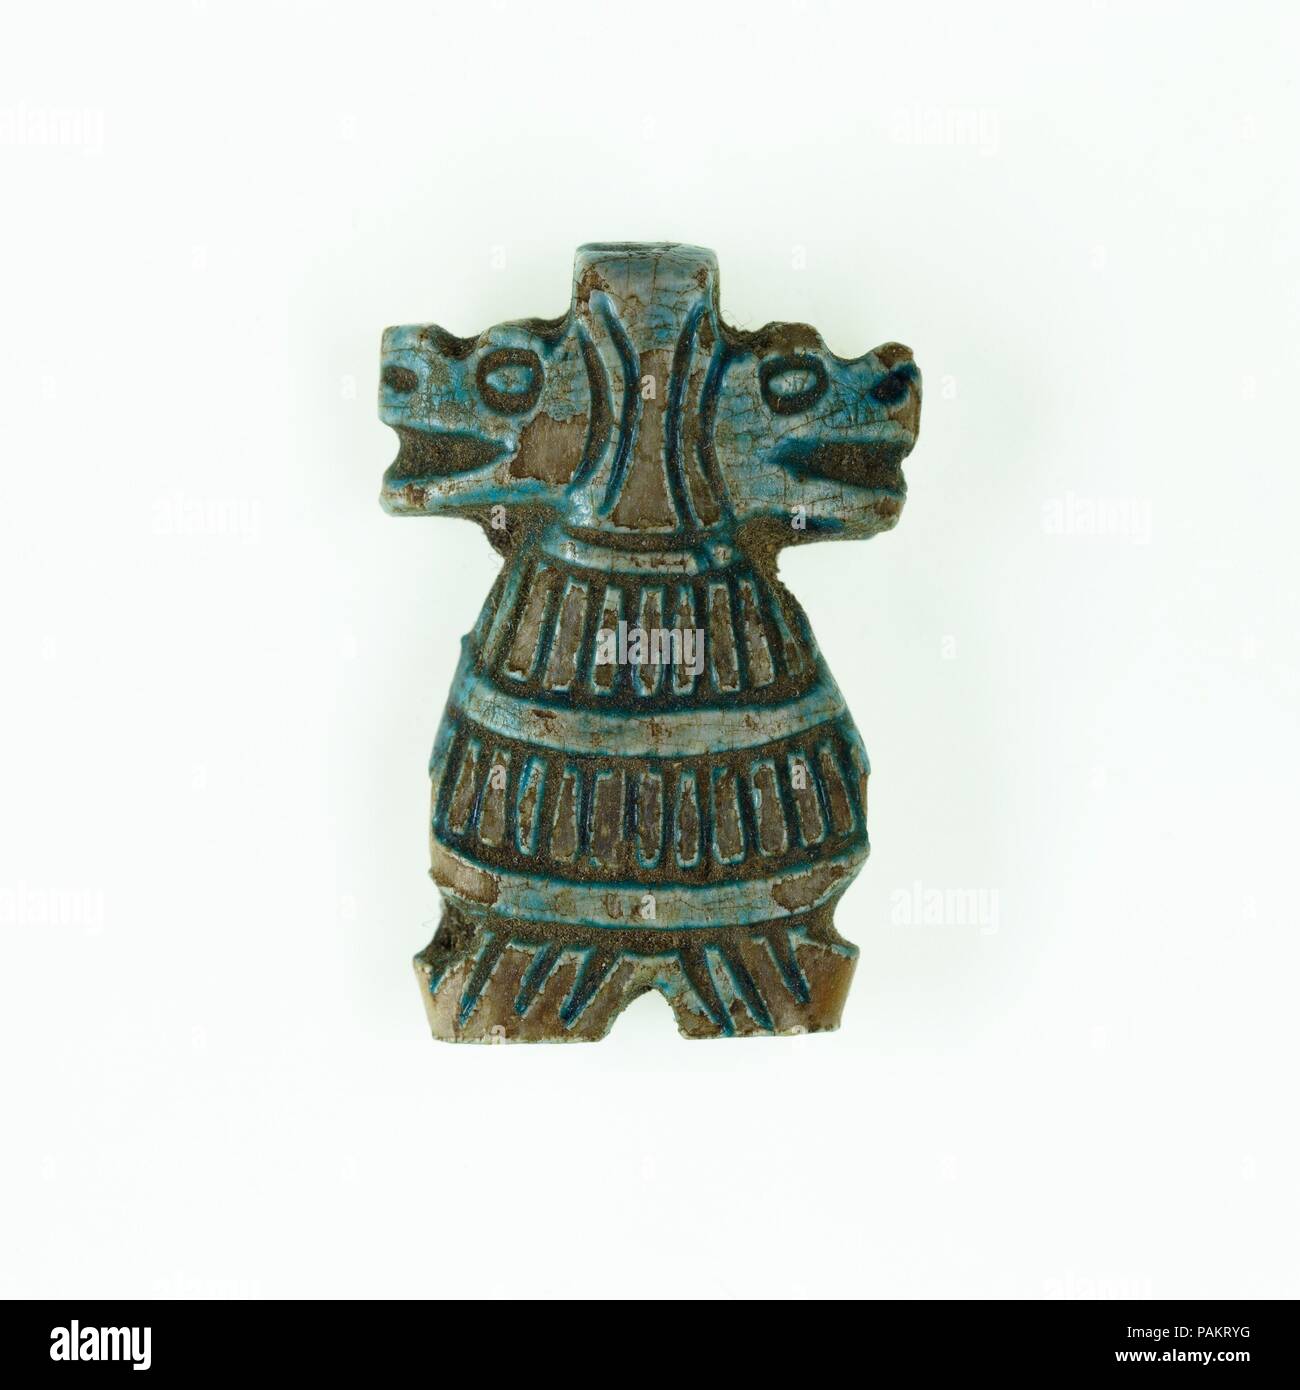 Taweret amulet with double head. Dimensions: H. 2 cm (13/16 in.); W. 1.4 cm (9/16 in.); D. 0.4 cm (3/16 in.). Dynasty: Dynasty 18, late-Dynasty 19. Date: ca. 1390-1213 B.C..  Double-headed  amulets of the domestic goddess Taweret are rare forms and date to the 18th dynasty,. Amarna is among the known findspots for these, although this particular example is without provenance. Museum: Metropolitan Museum of Art, New York, USA. Stock Photo